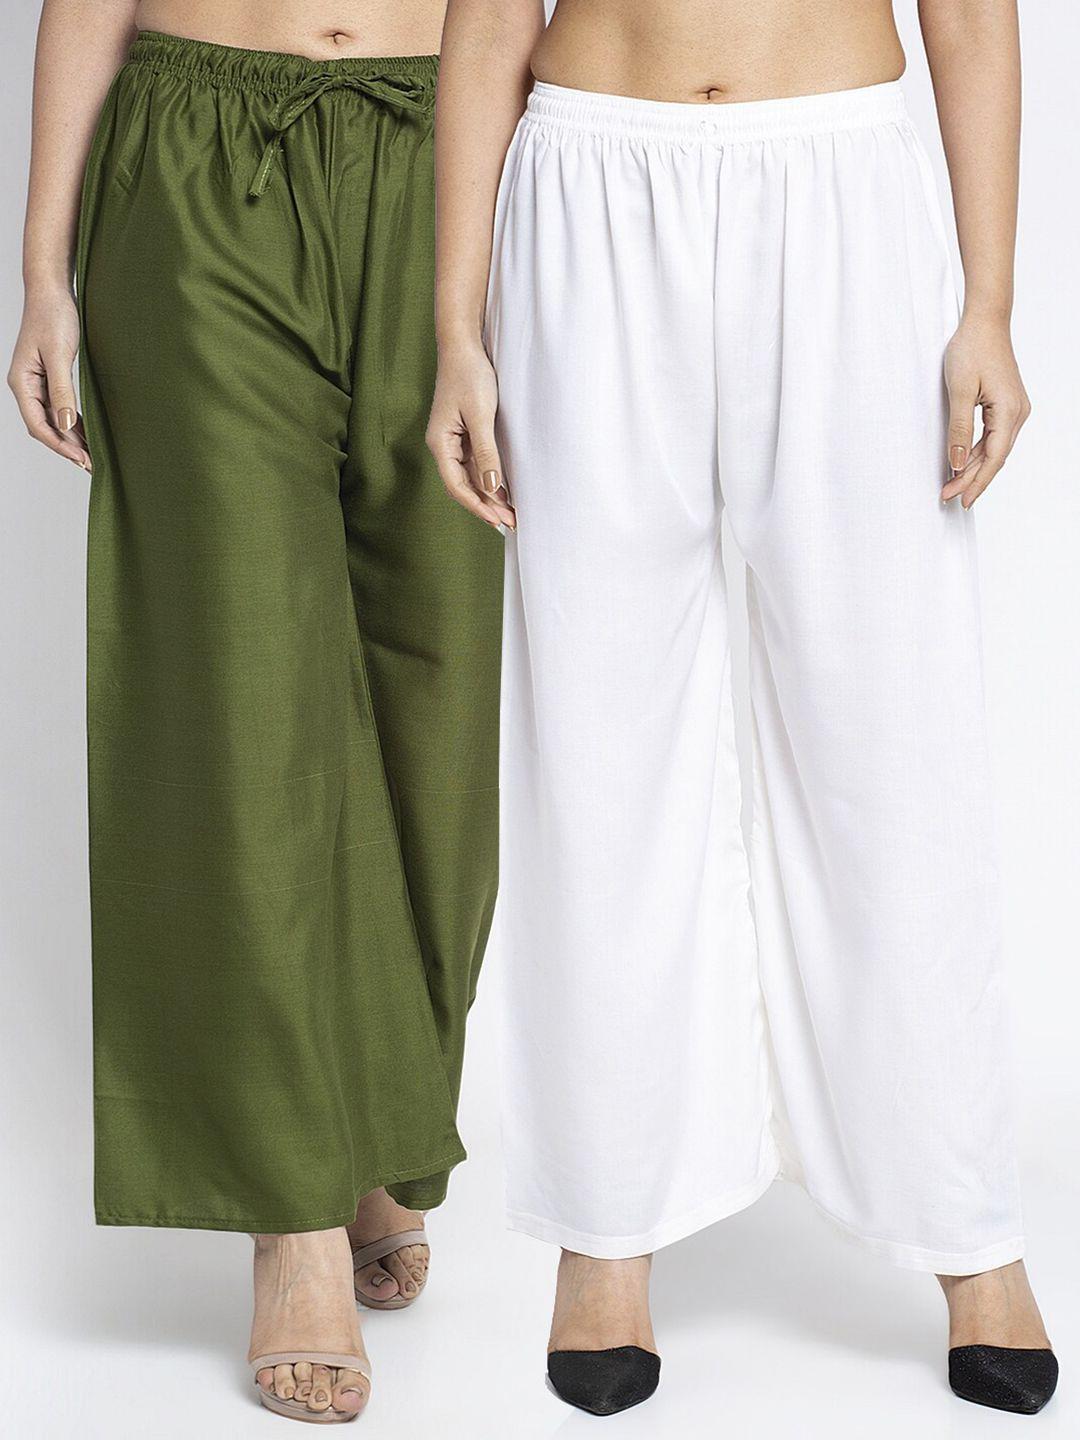 gracit-women-pack-of-2-olive-green-&-white-ethnic-palazzos